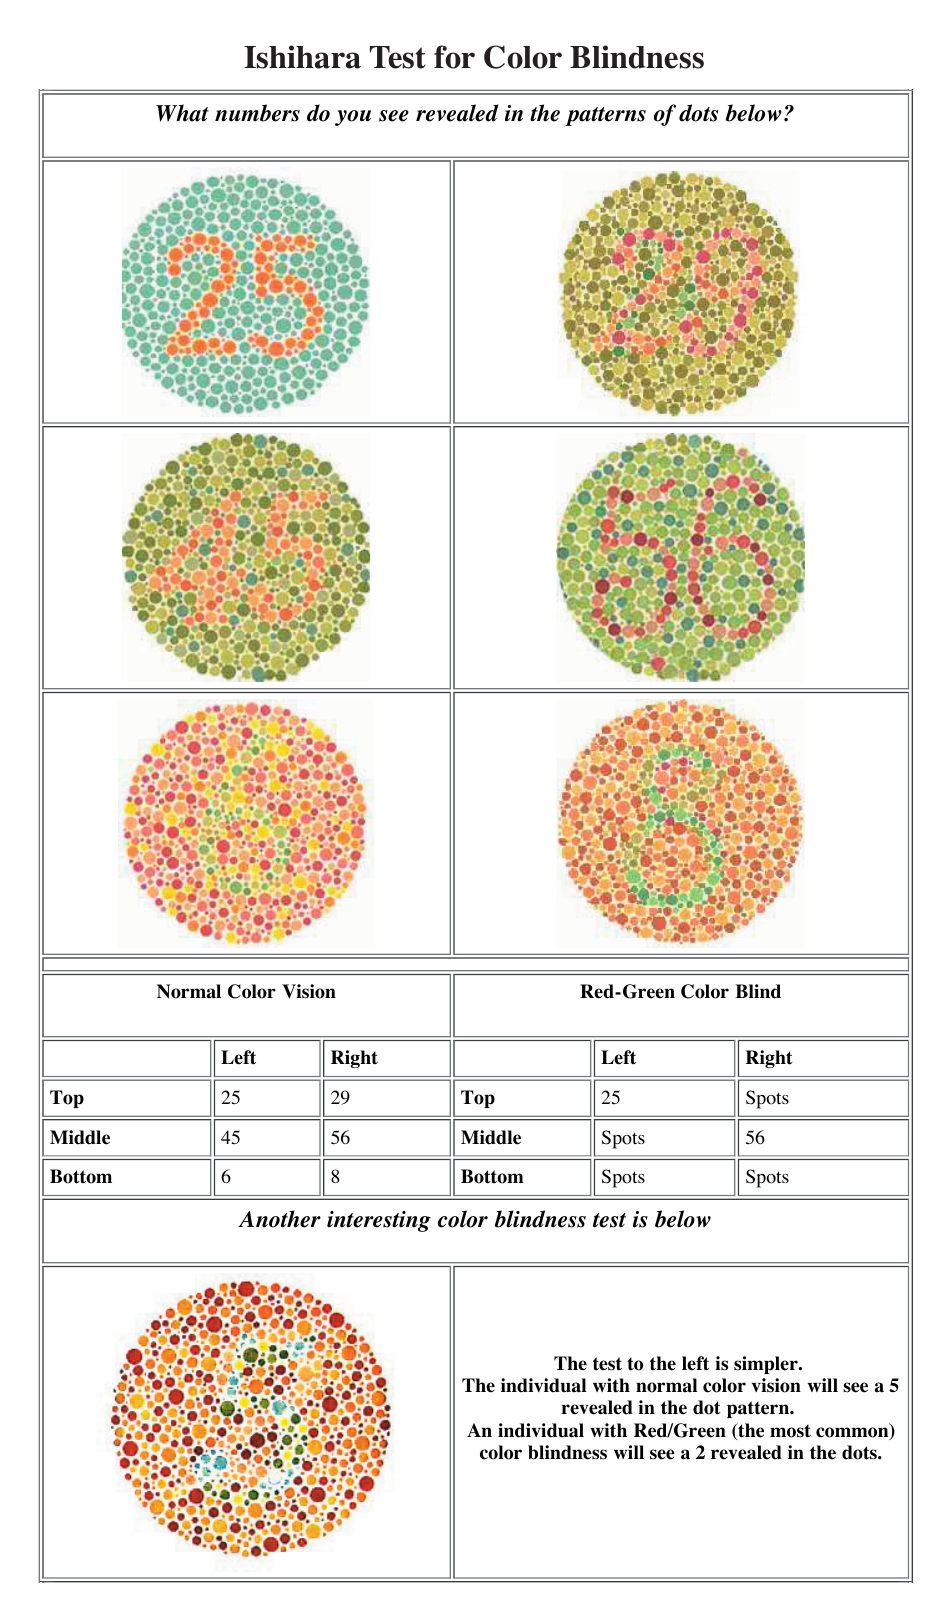 ishihara-test-for-color-blindness-chart-download-printable-pdf